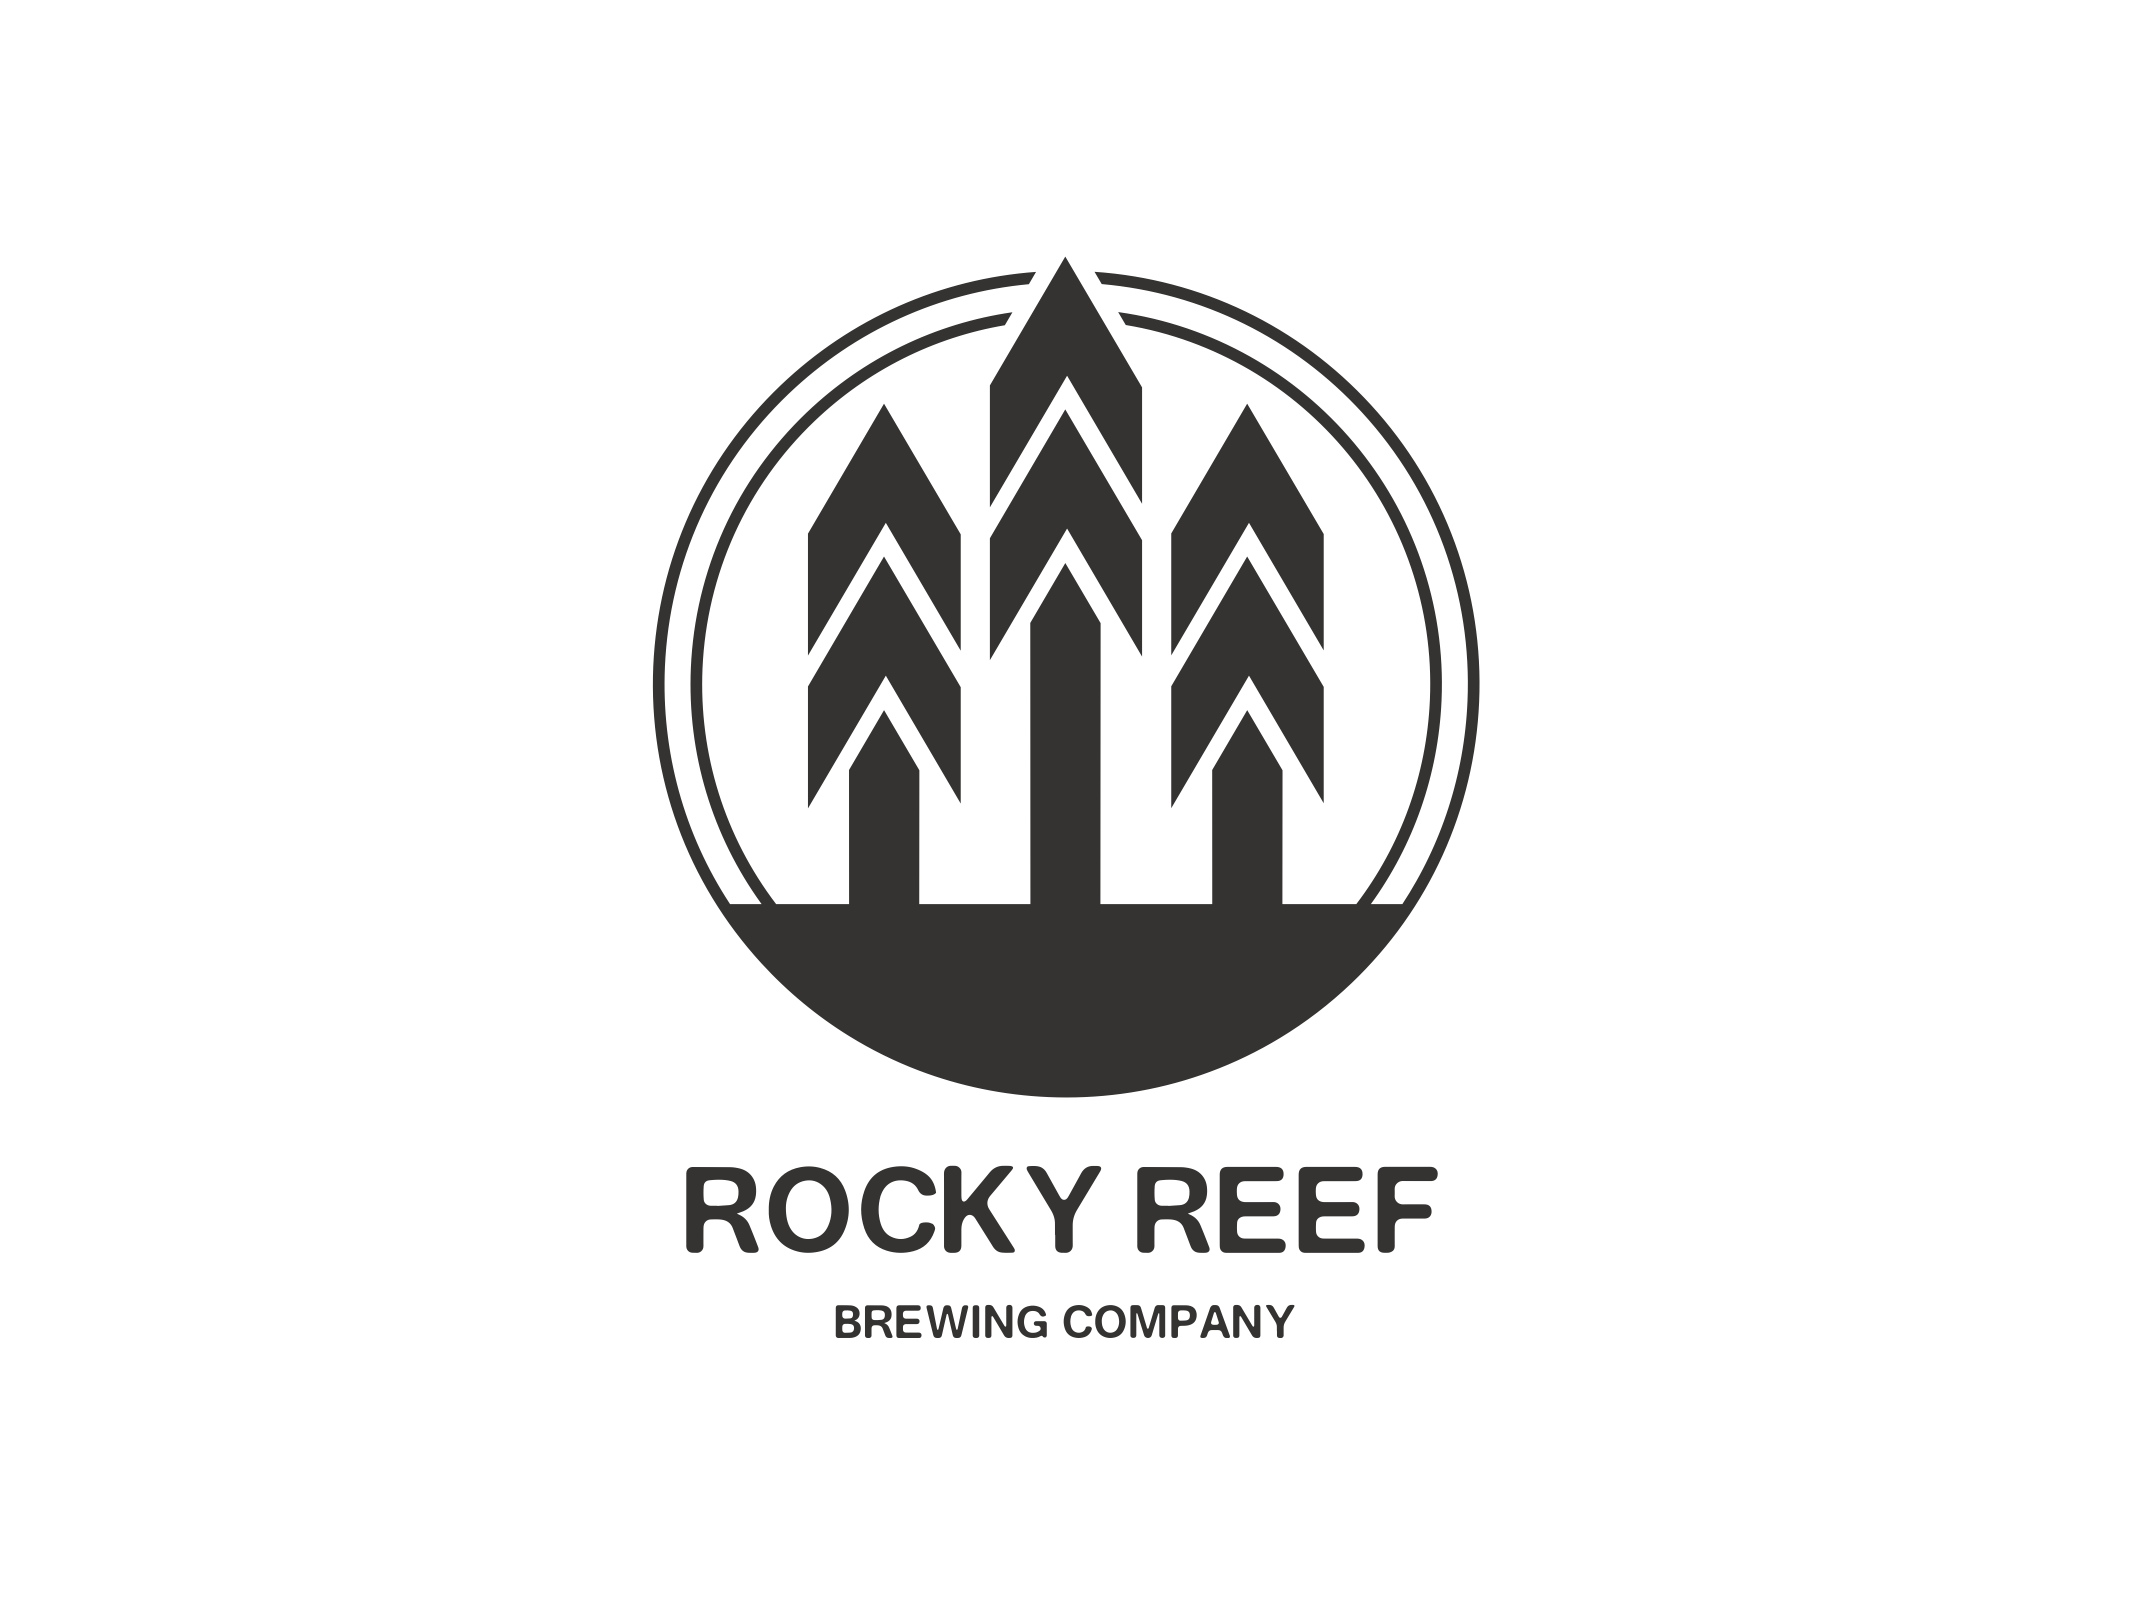 Episode 41 - Rocky Reef Brewing Co